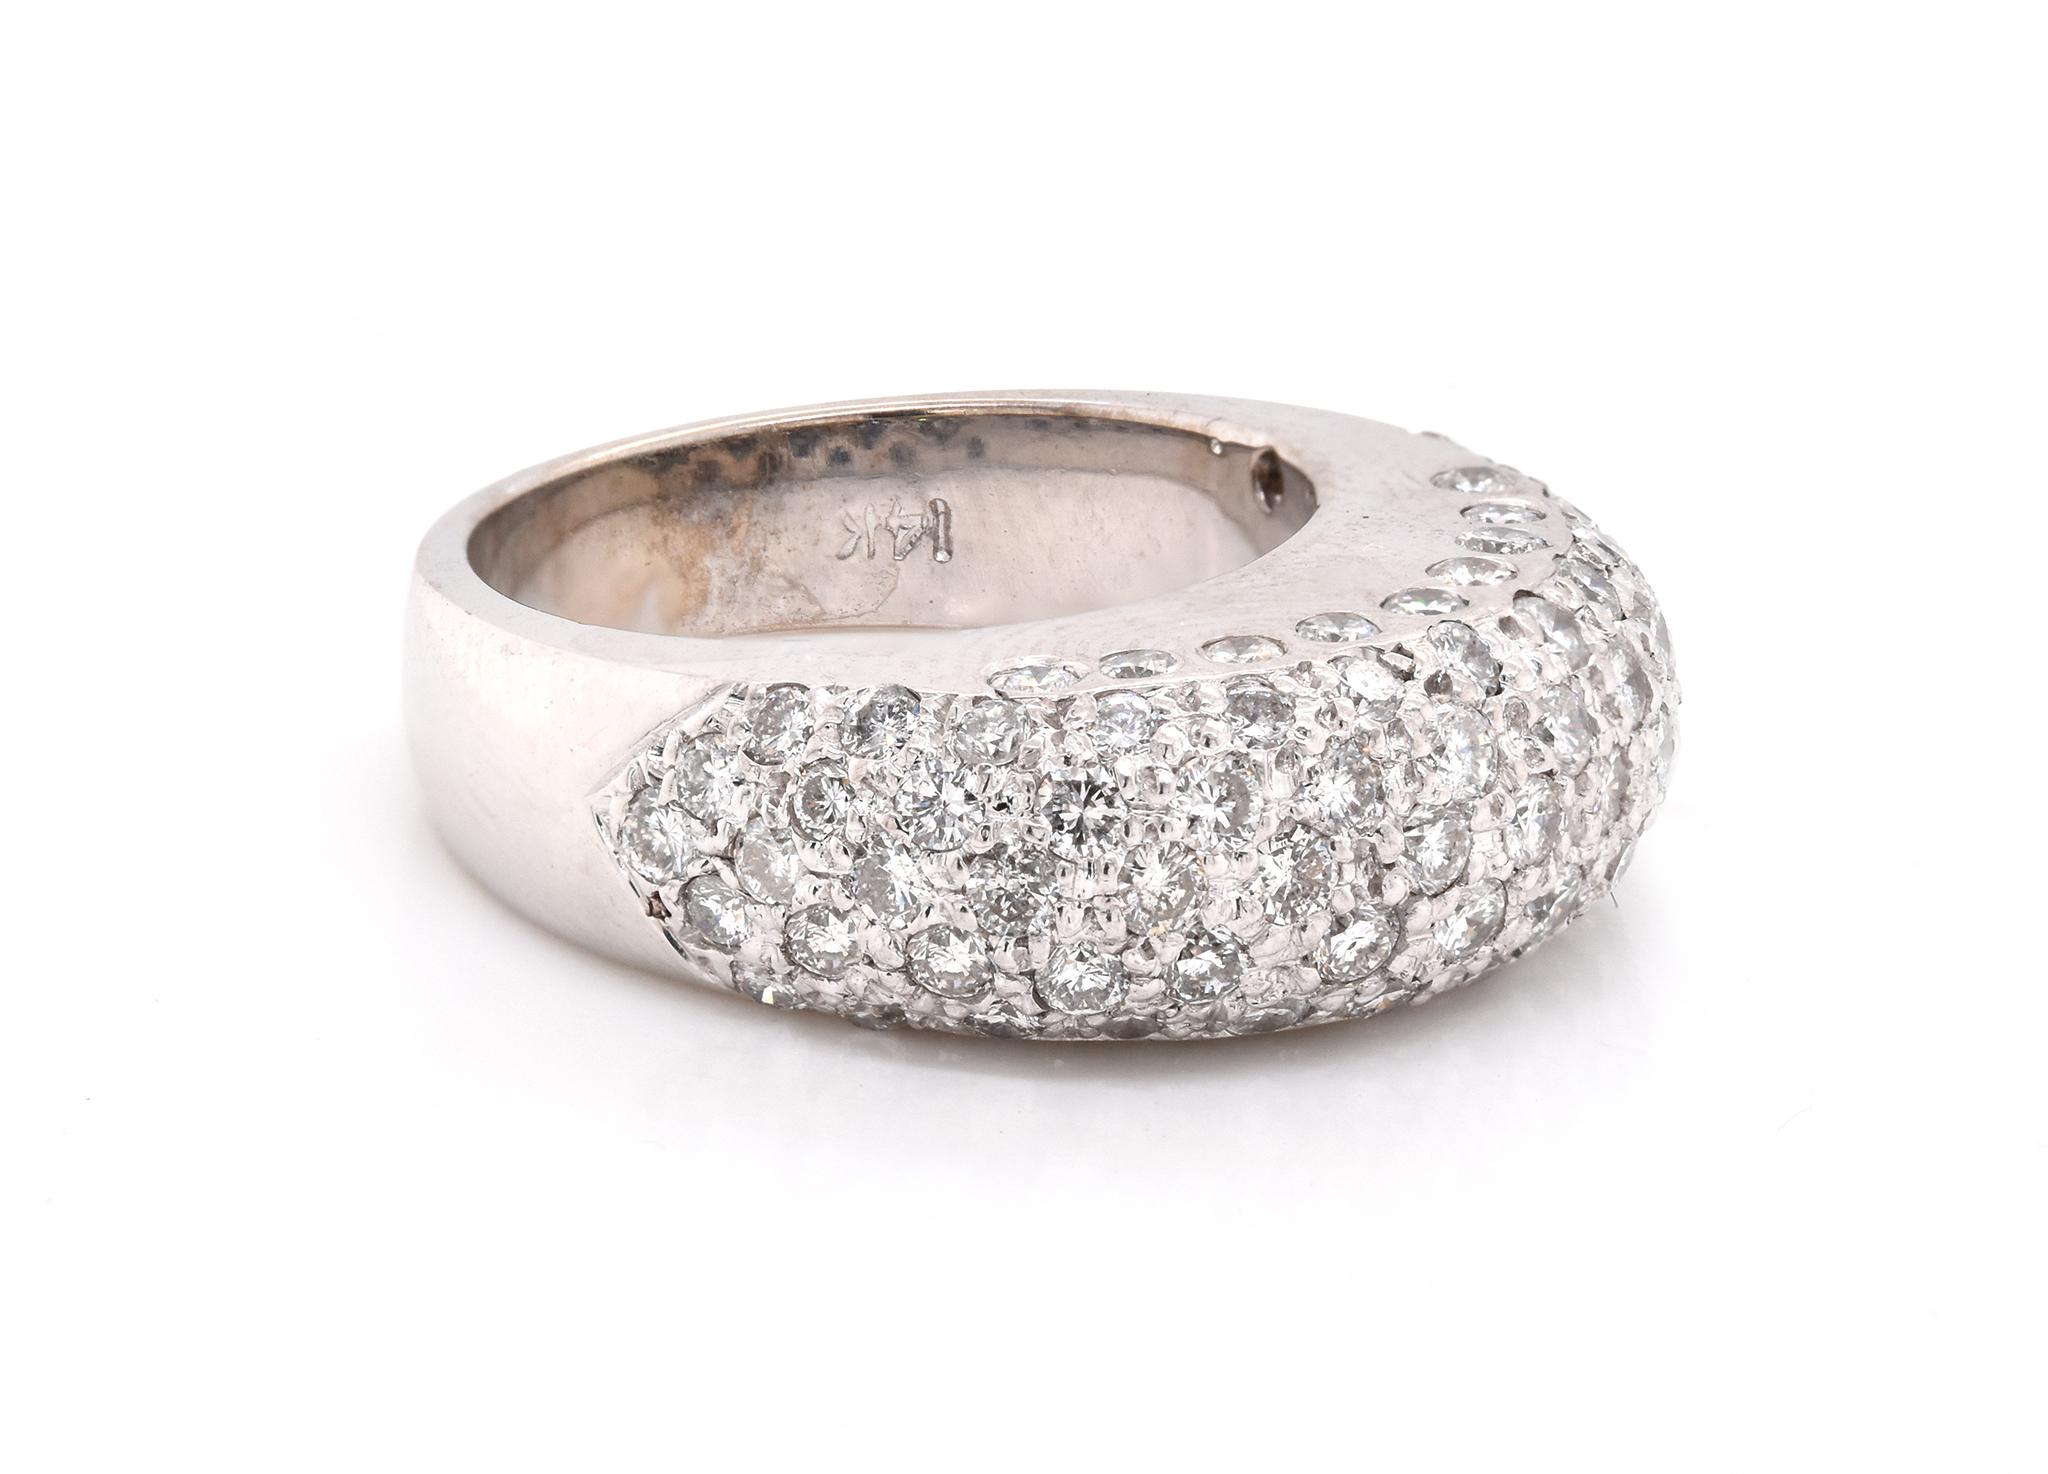 Designer: custom
Material: 14K white gold
Diamonds: 87 round cut =1.50cttw
Color: G
Clarity: VS1
Ring size: 6 (please allow two additional shipping days for sizing requests)
Dimensions: ring top is 7.5mm wide 
Weight:  9.02 grams 
